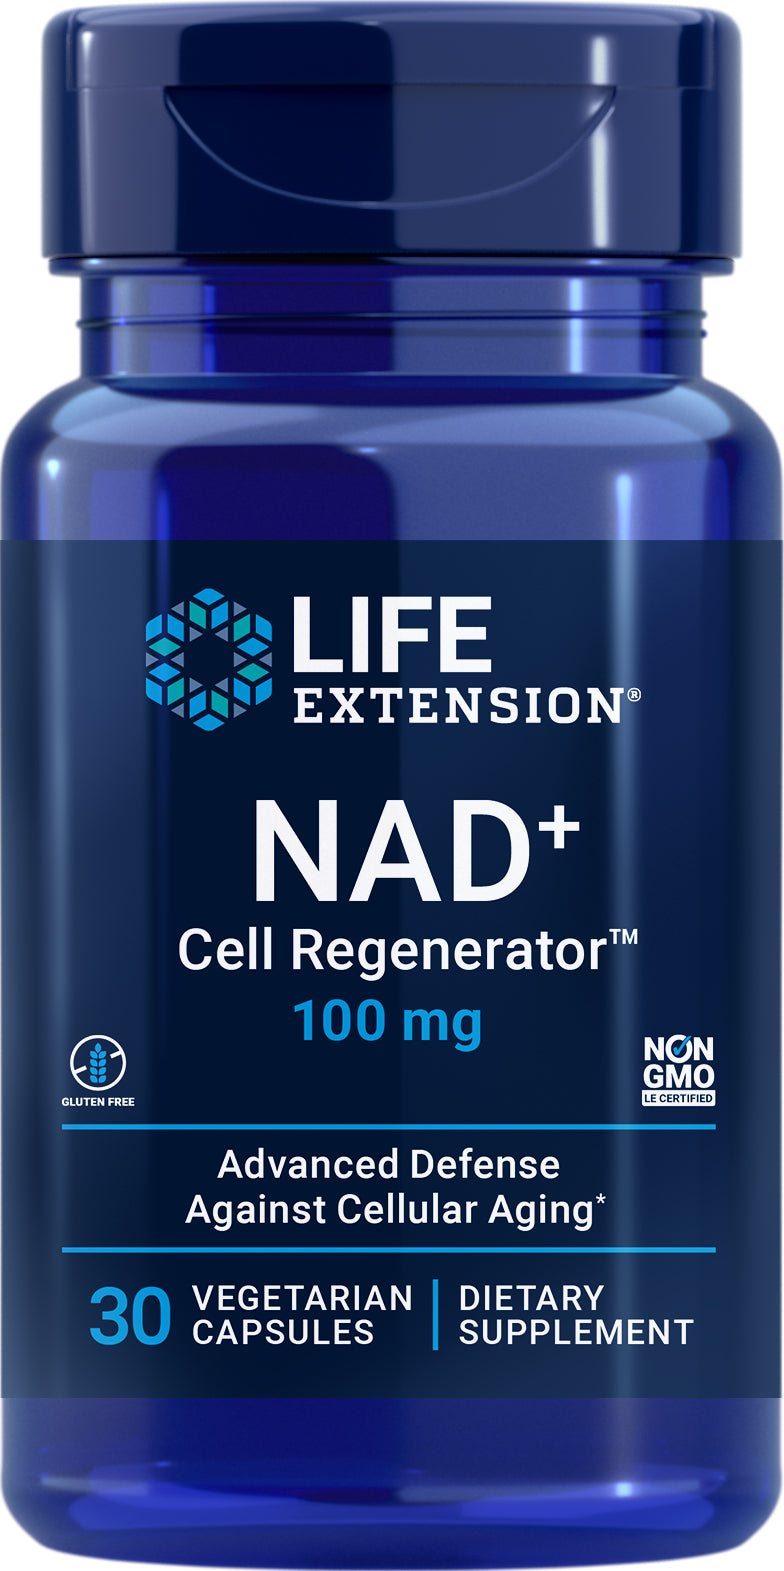 NAD+ Cell Regenerator™ 100 mg, 30 veg caps by Life Extension